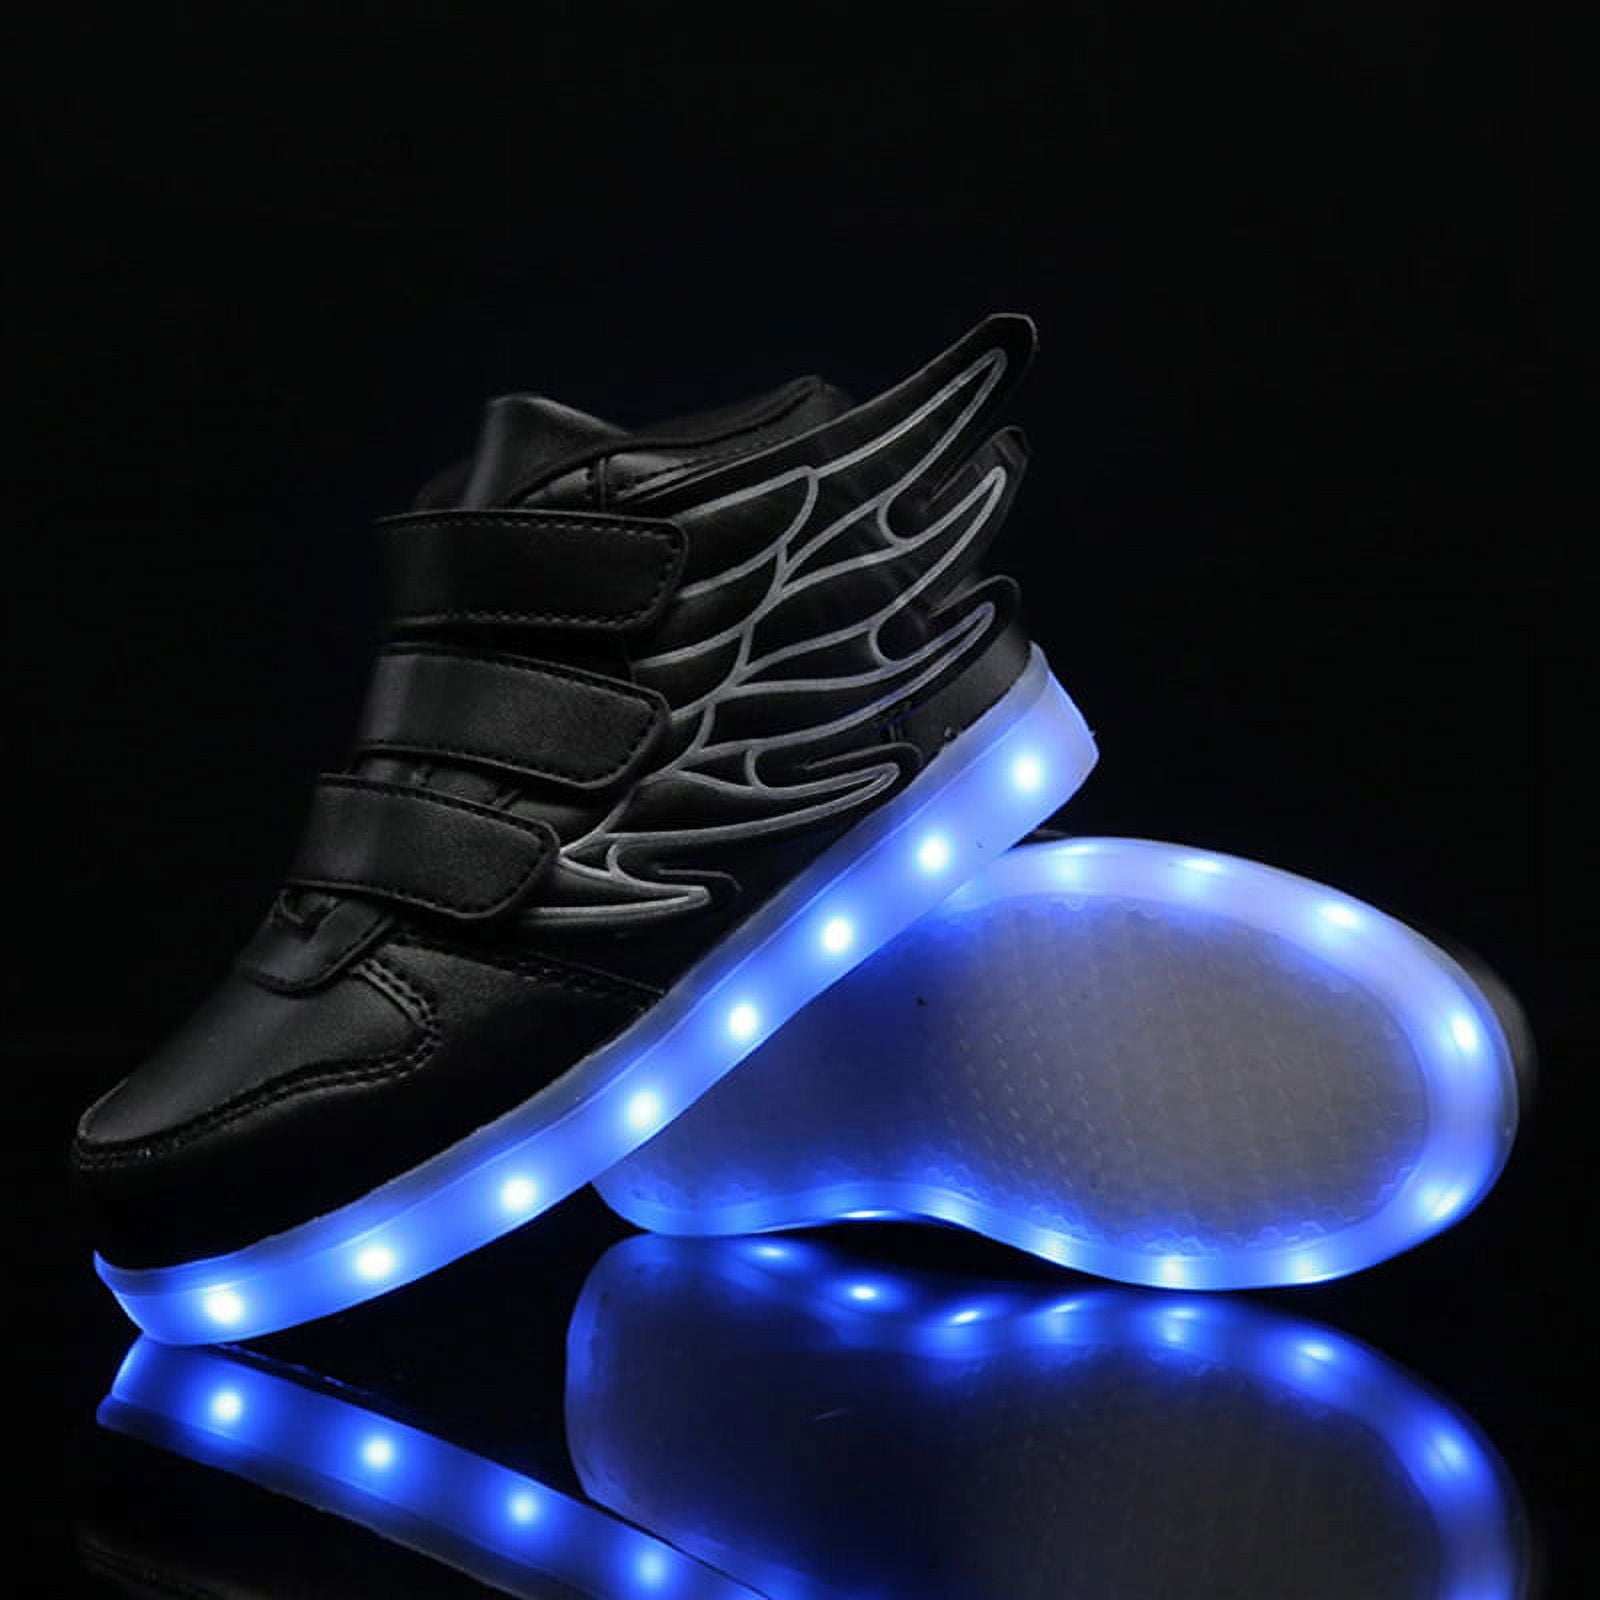 Neon Kyx Kids Black Tennis Shoes - Size 2 - Neon Light Up - Rechargeable |  eBay